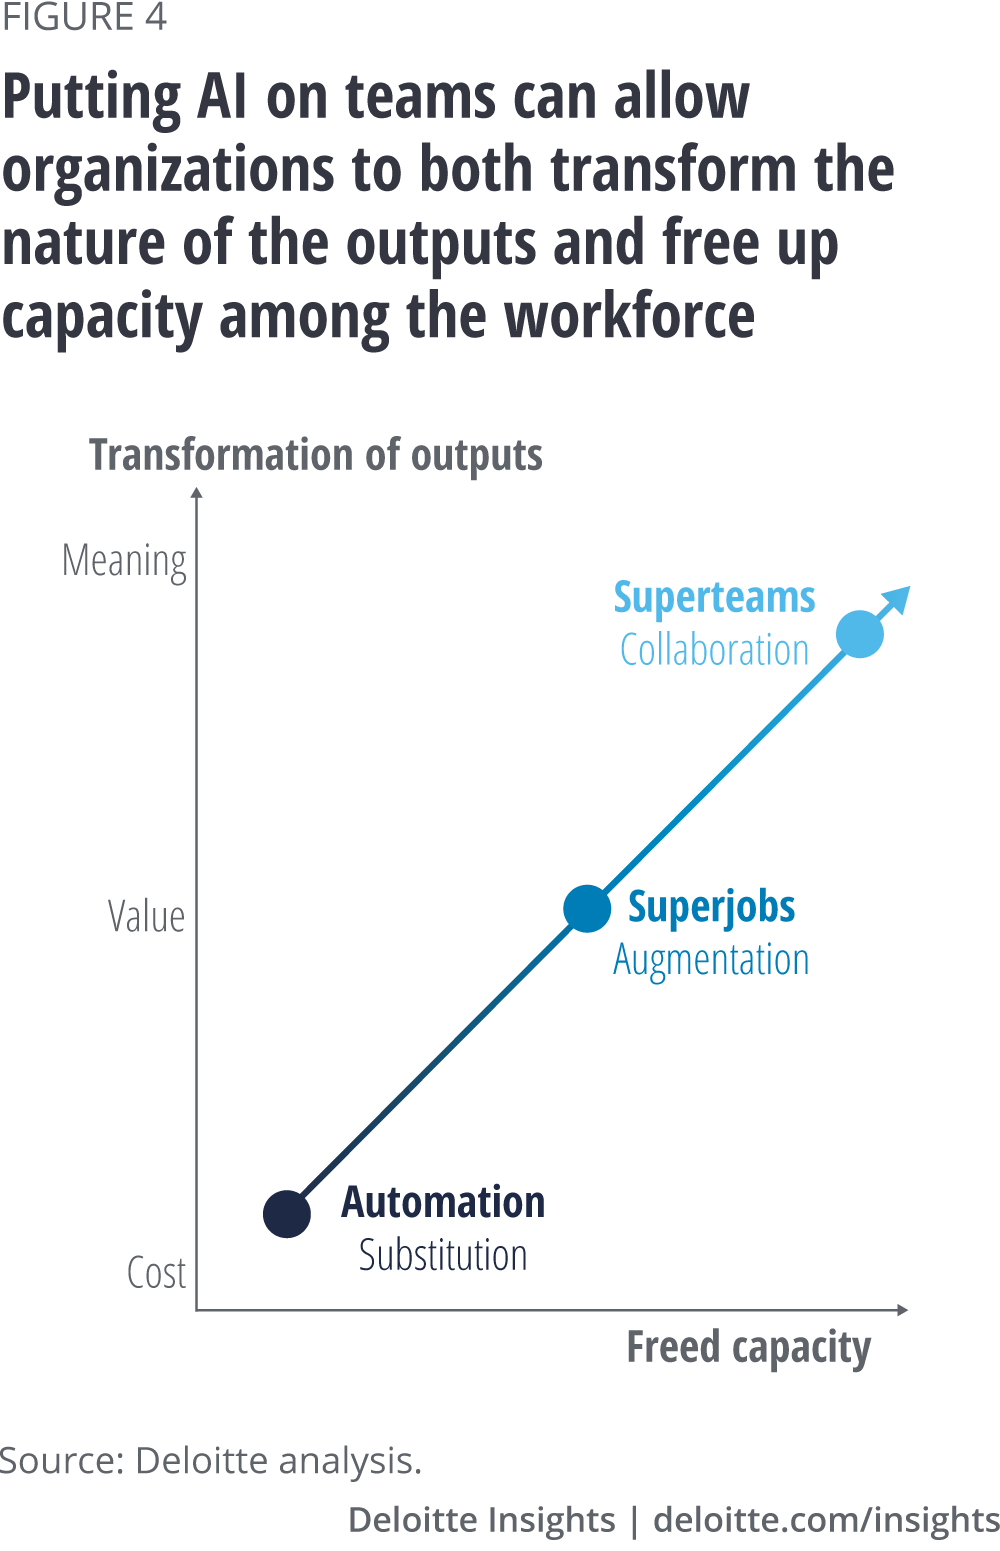 Putting AI on teams can allow organizations to both transform the nature of the outputs and free up capacity among the workforce